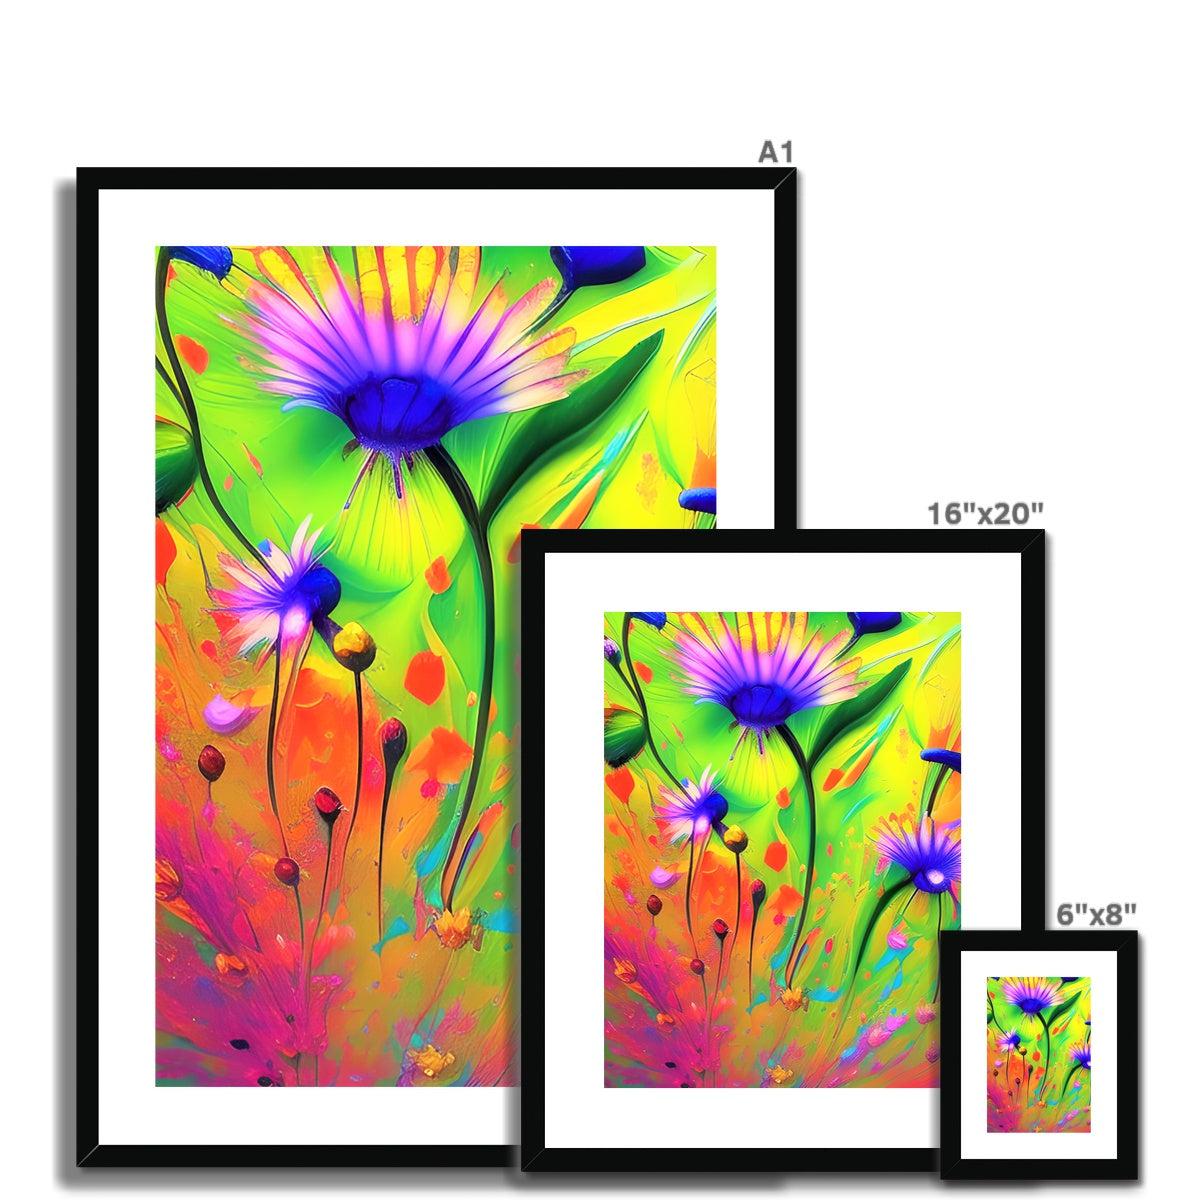 Painted Flowers Framed & Mounted Print